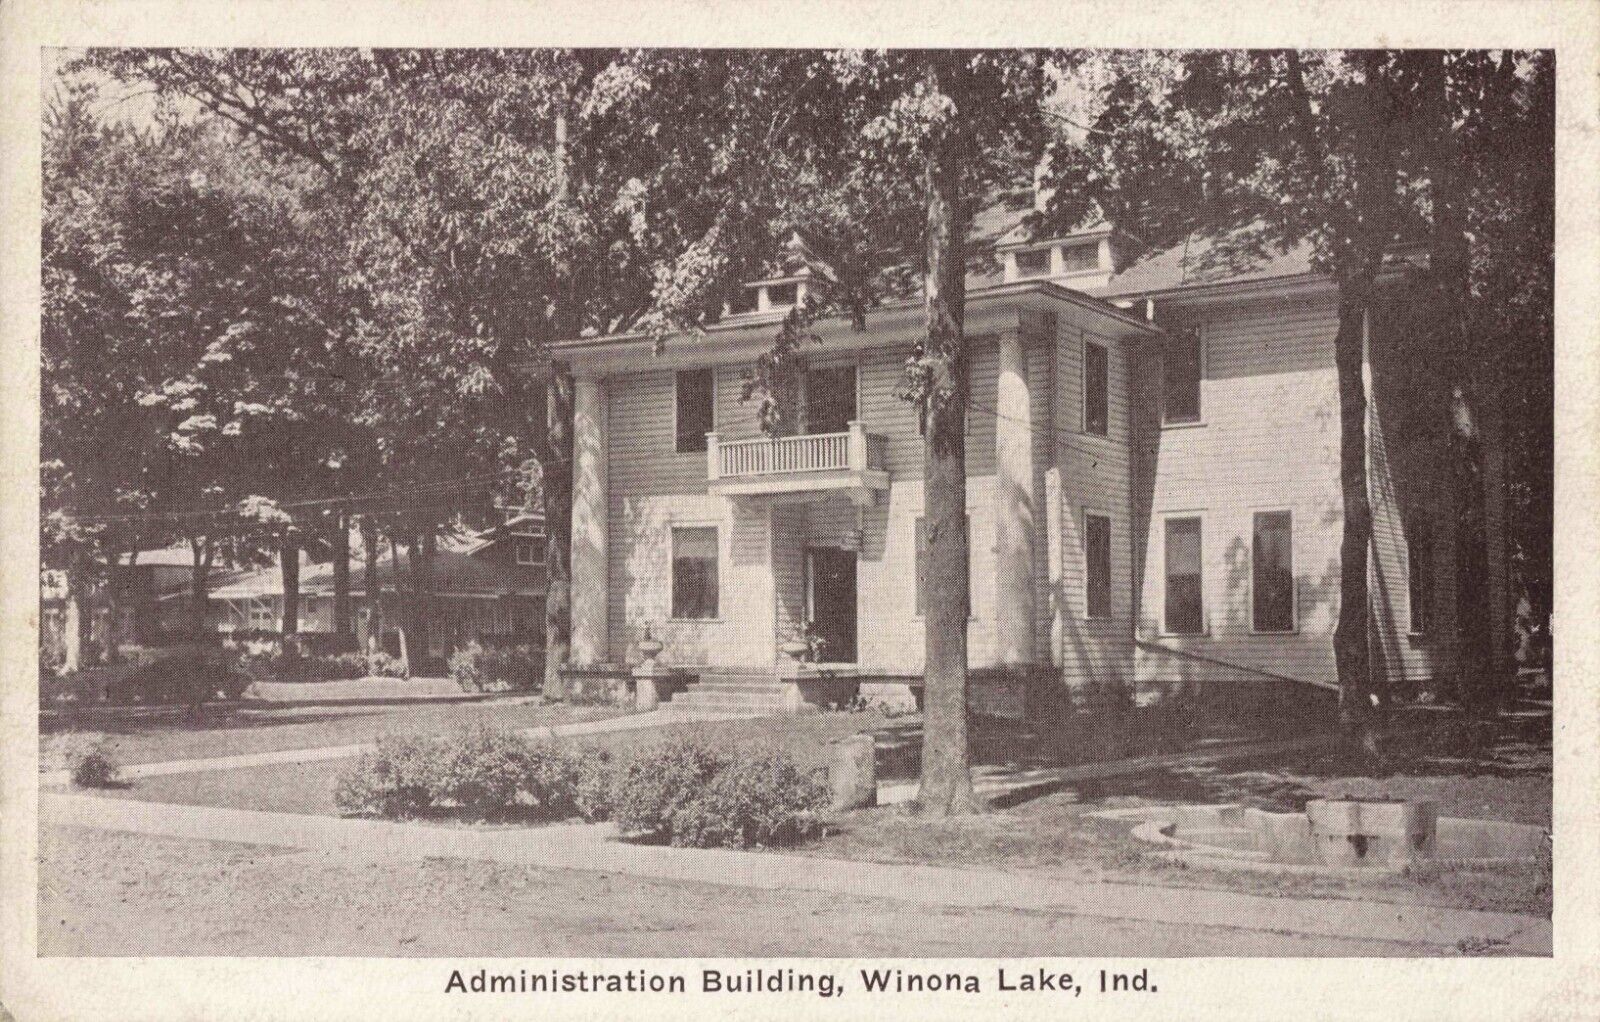 Administration Building Winona Lake Indiana IN c1920s Postcard